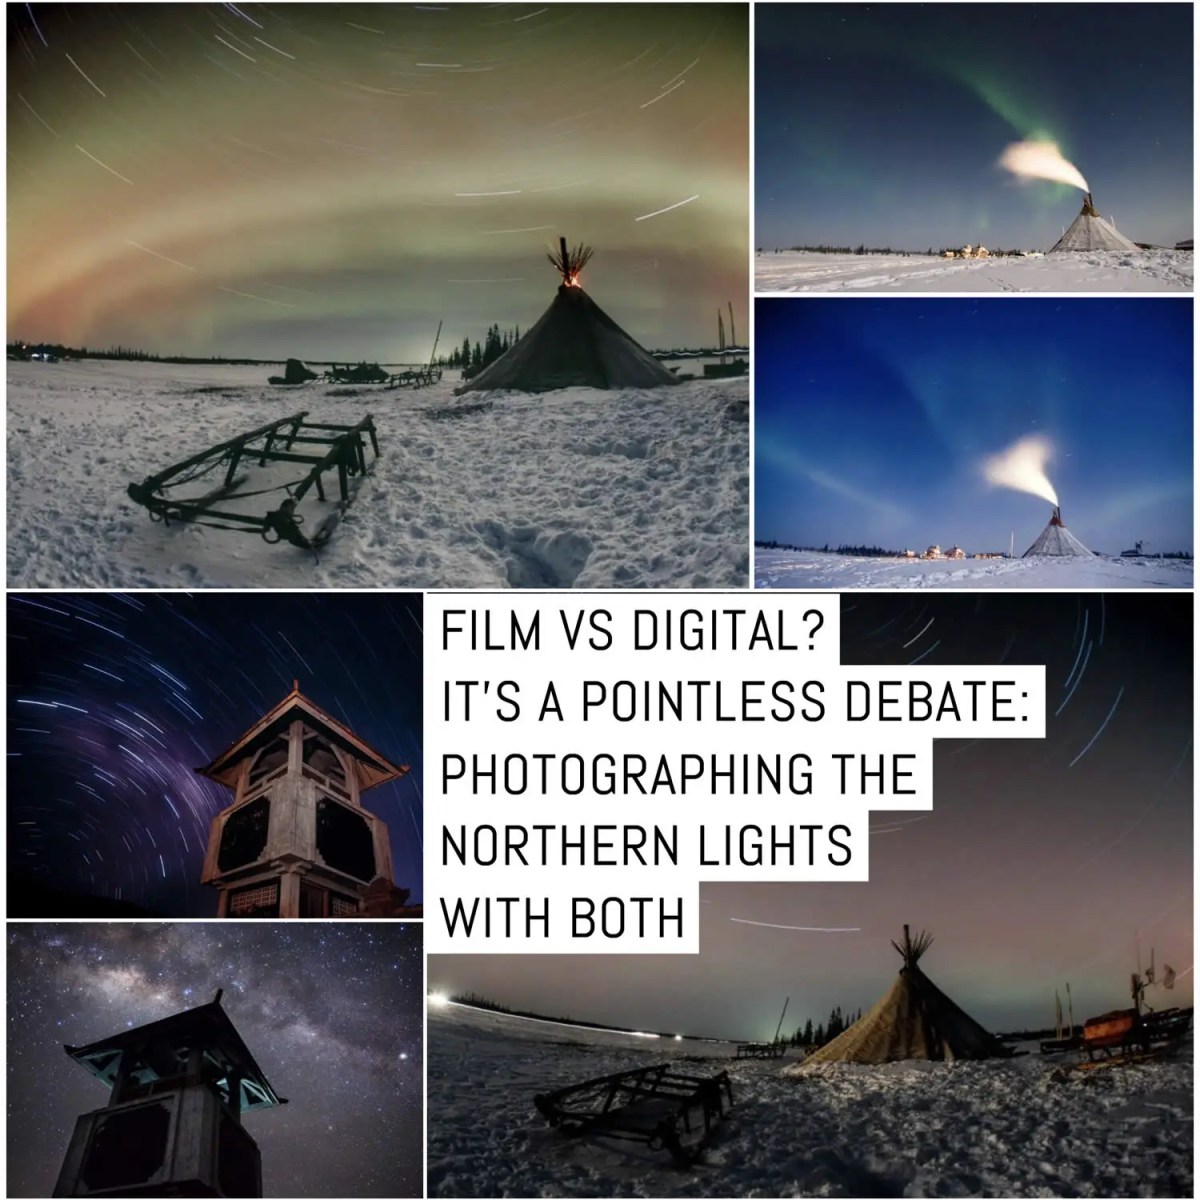 Film vs digital? It's a pointless debate: photographing the Northern Lights